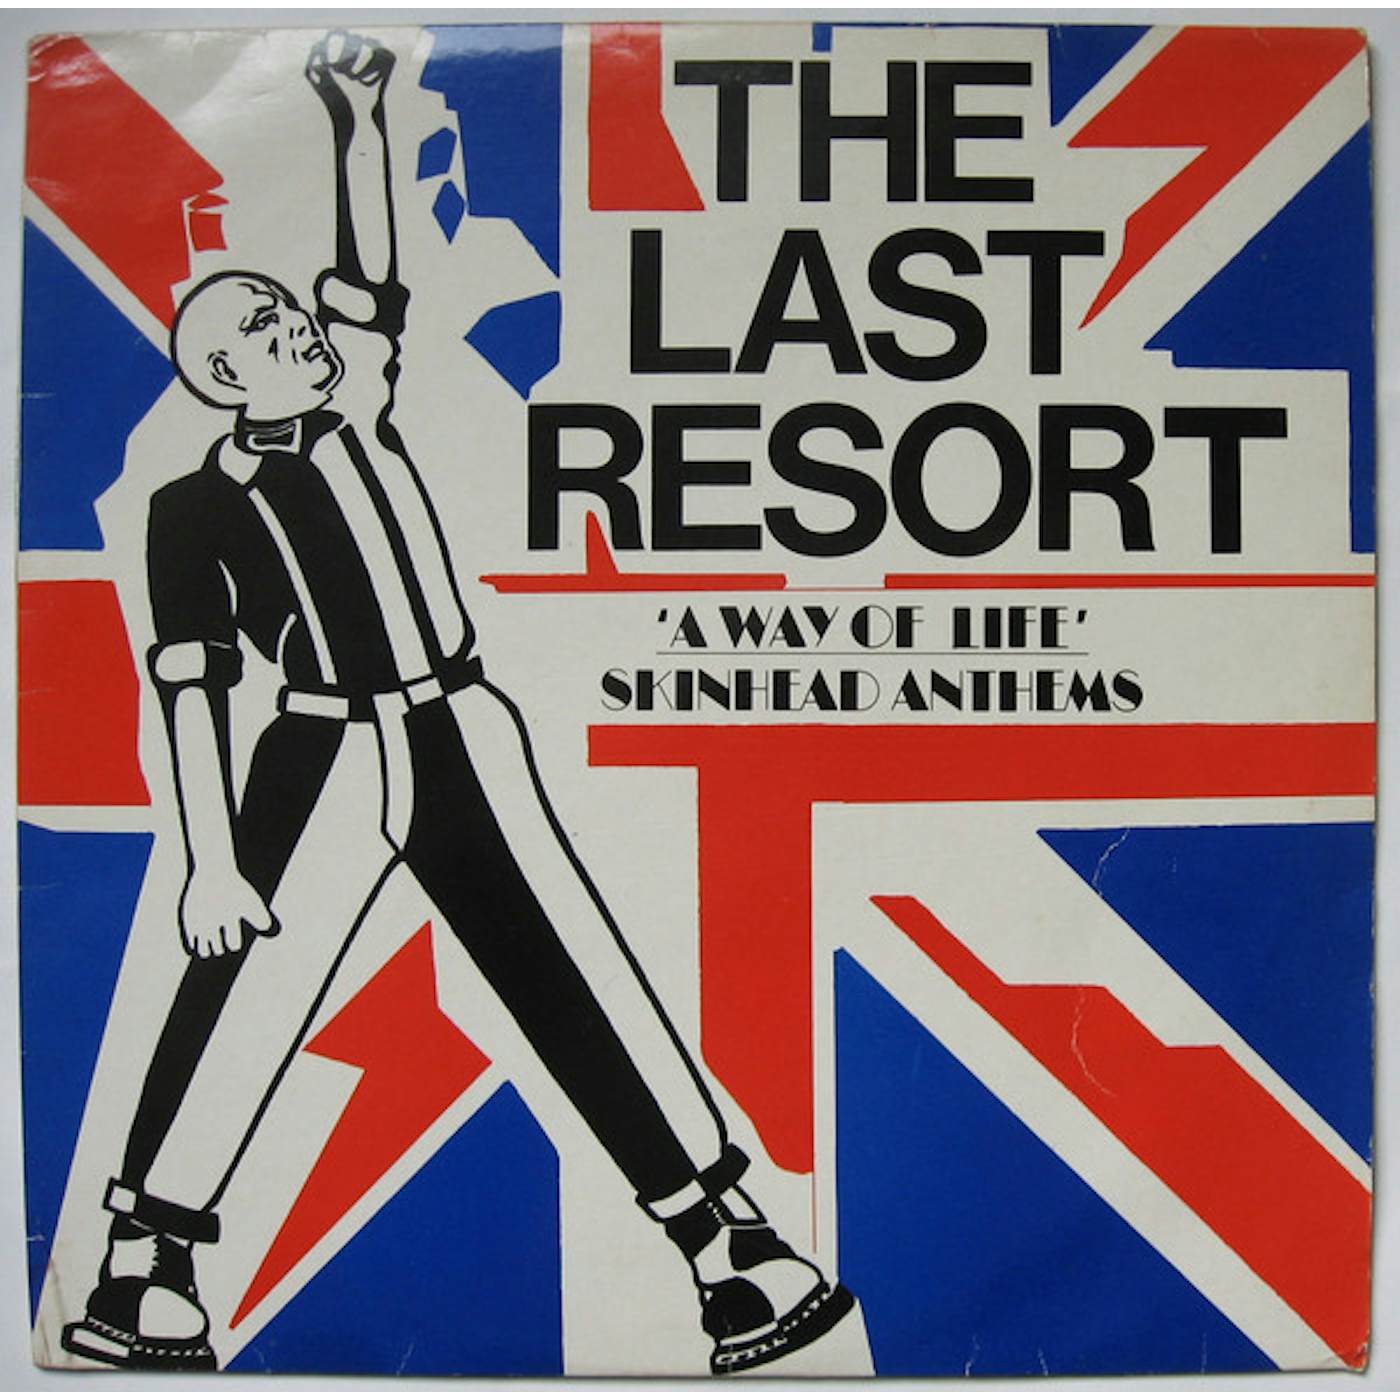 Last Resort WAY OF LIFE: SKINHEAD ANTHEMS Vinyl Record - Italy Release